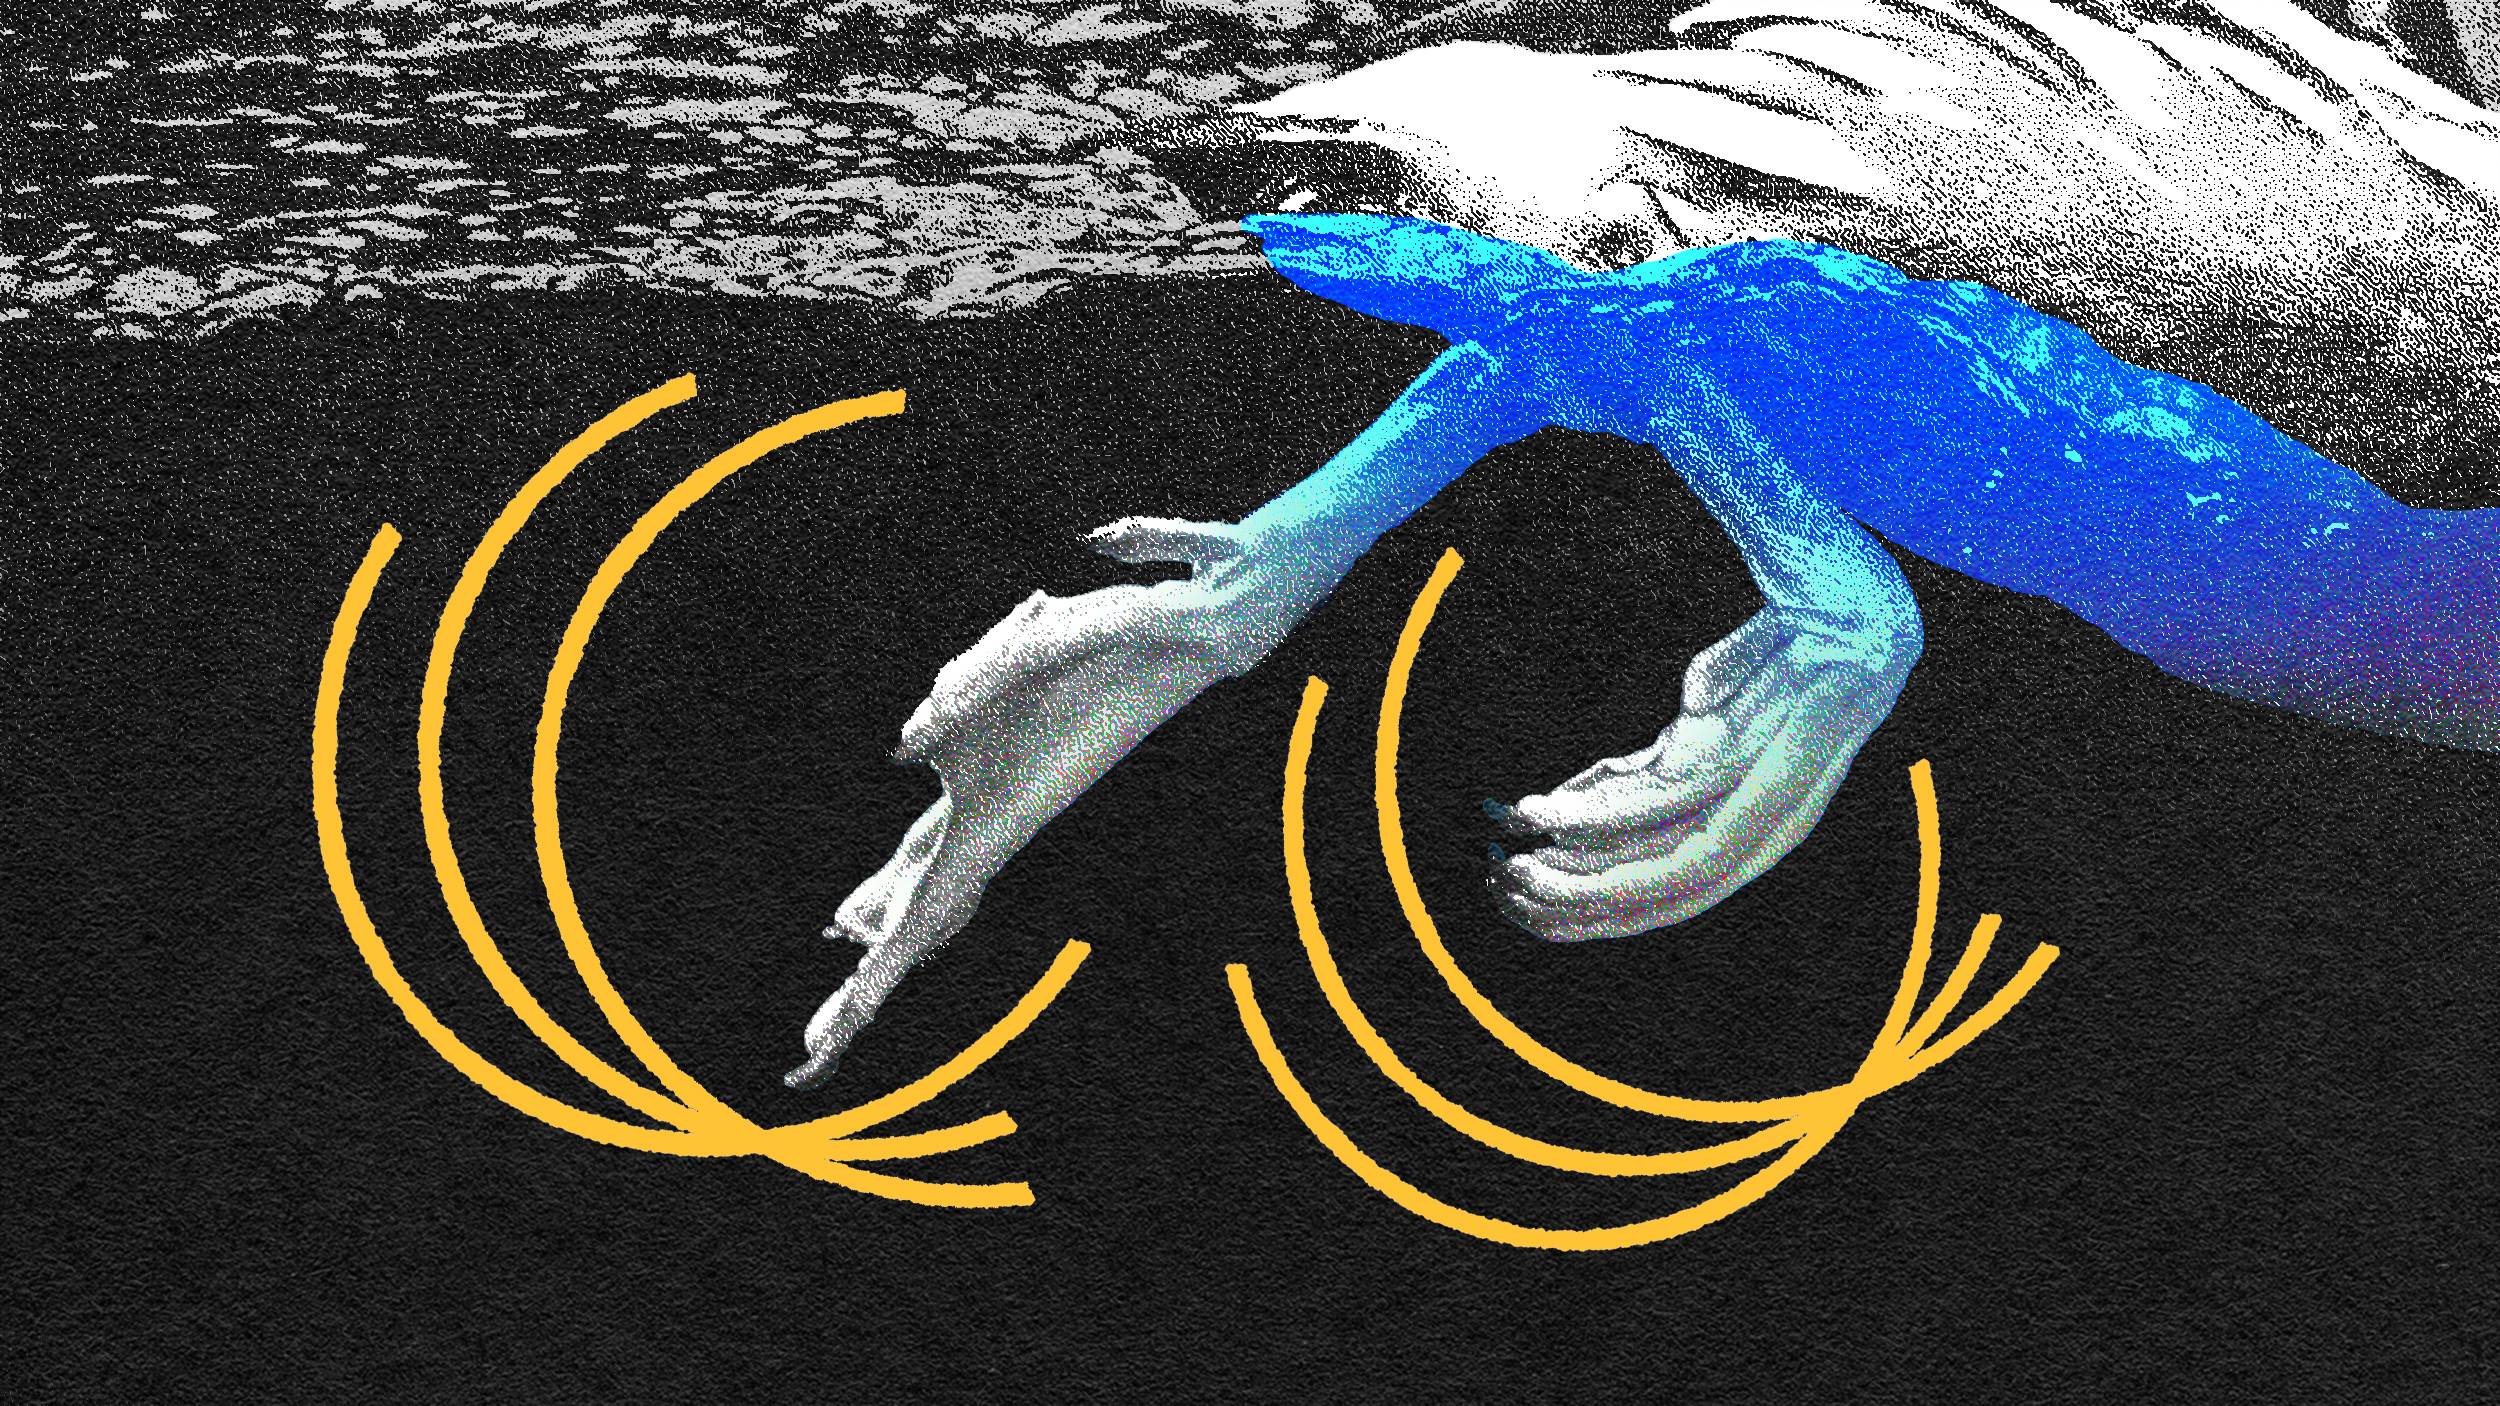 An image of a pelican with its feet in the water, capturing the essence of Stanford Duck Syndrome.